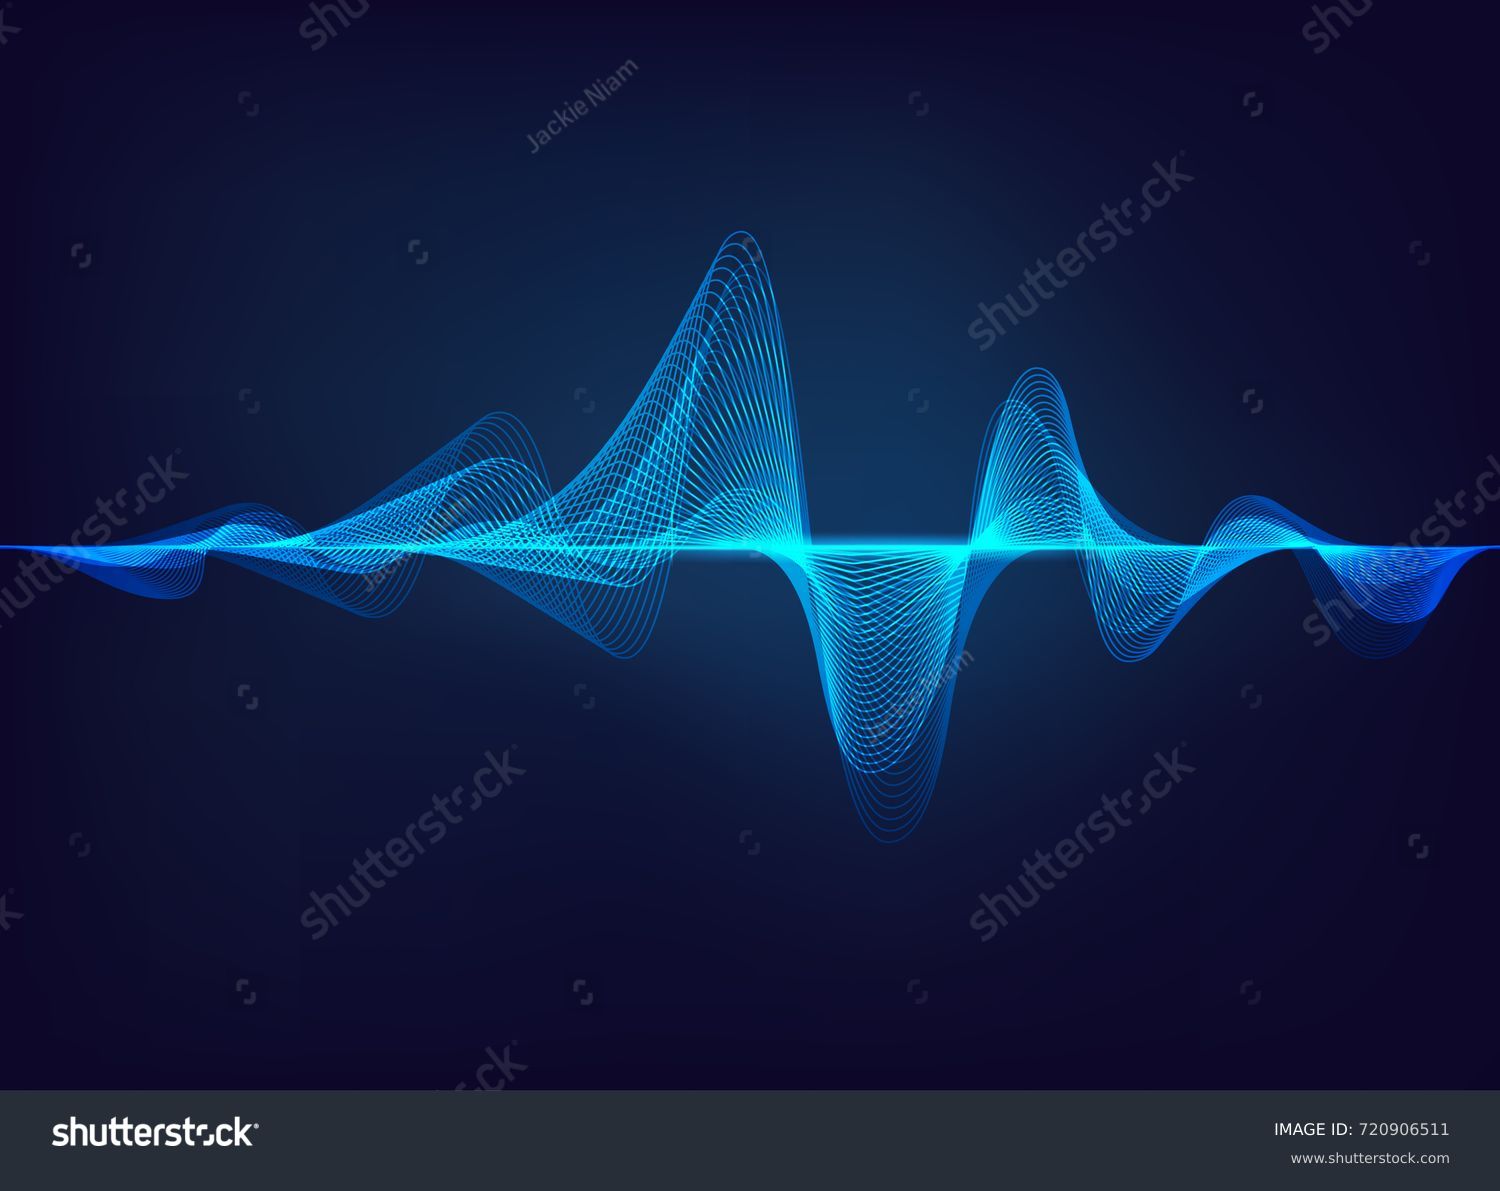 abstract blue digital equalizer, vector of sound wave pattern element #720906511